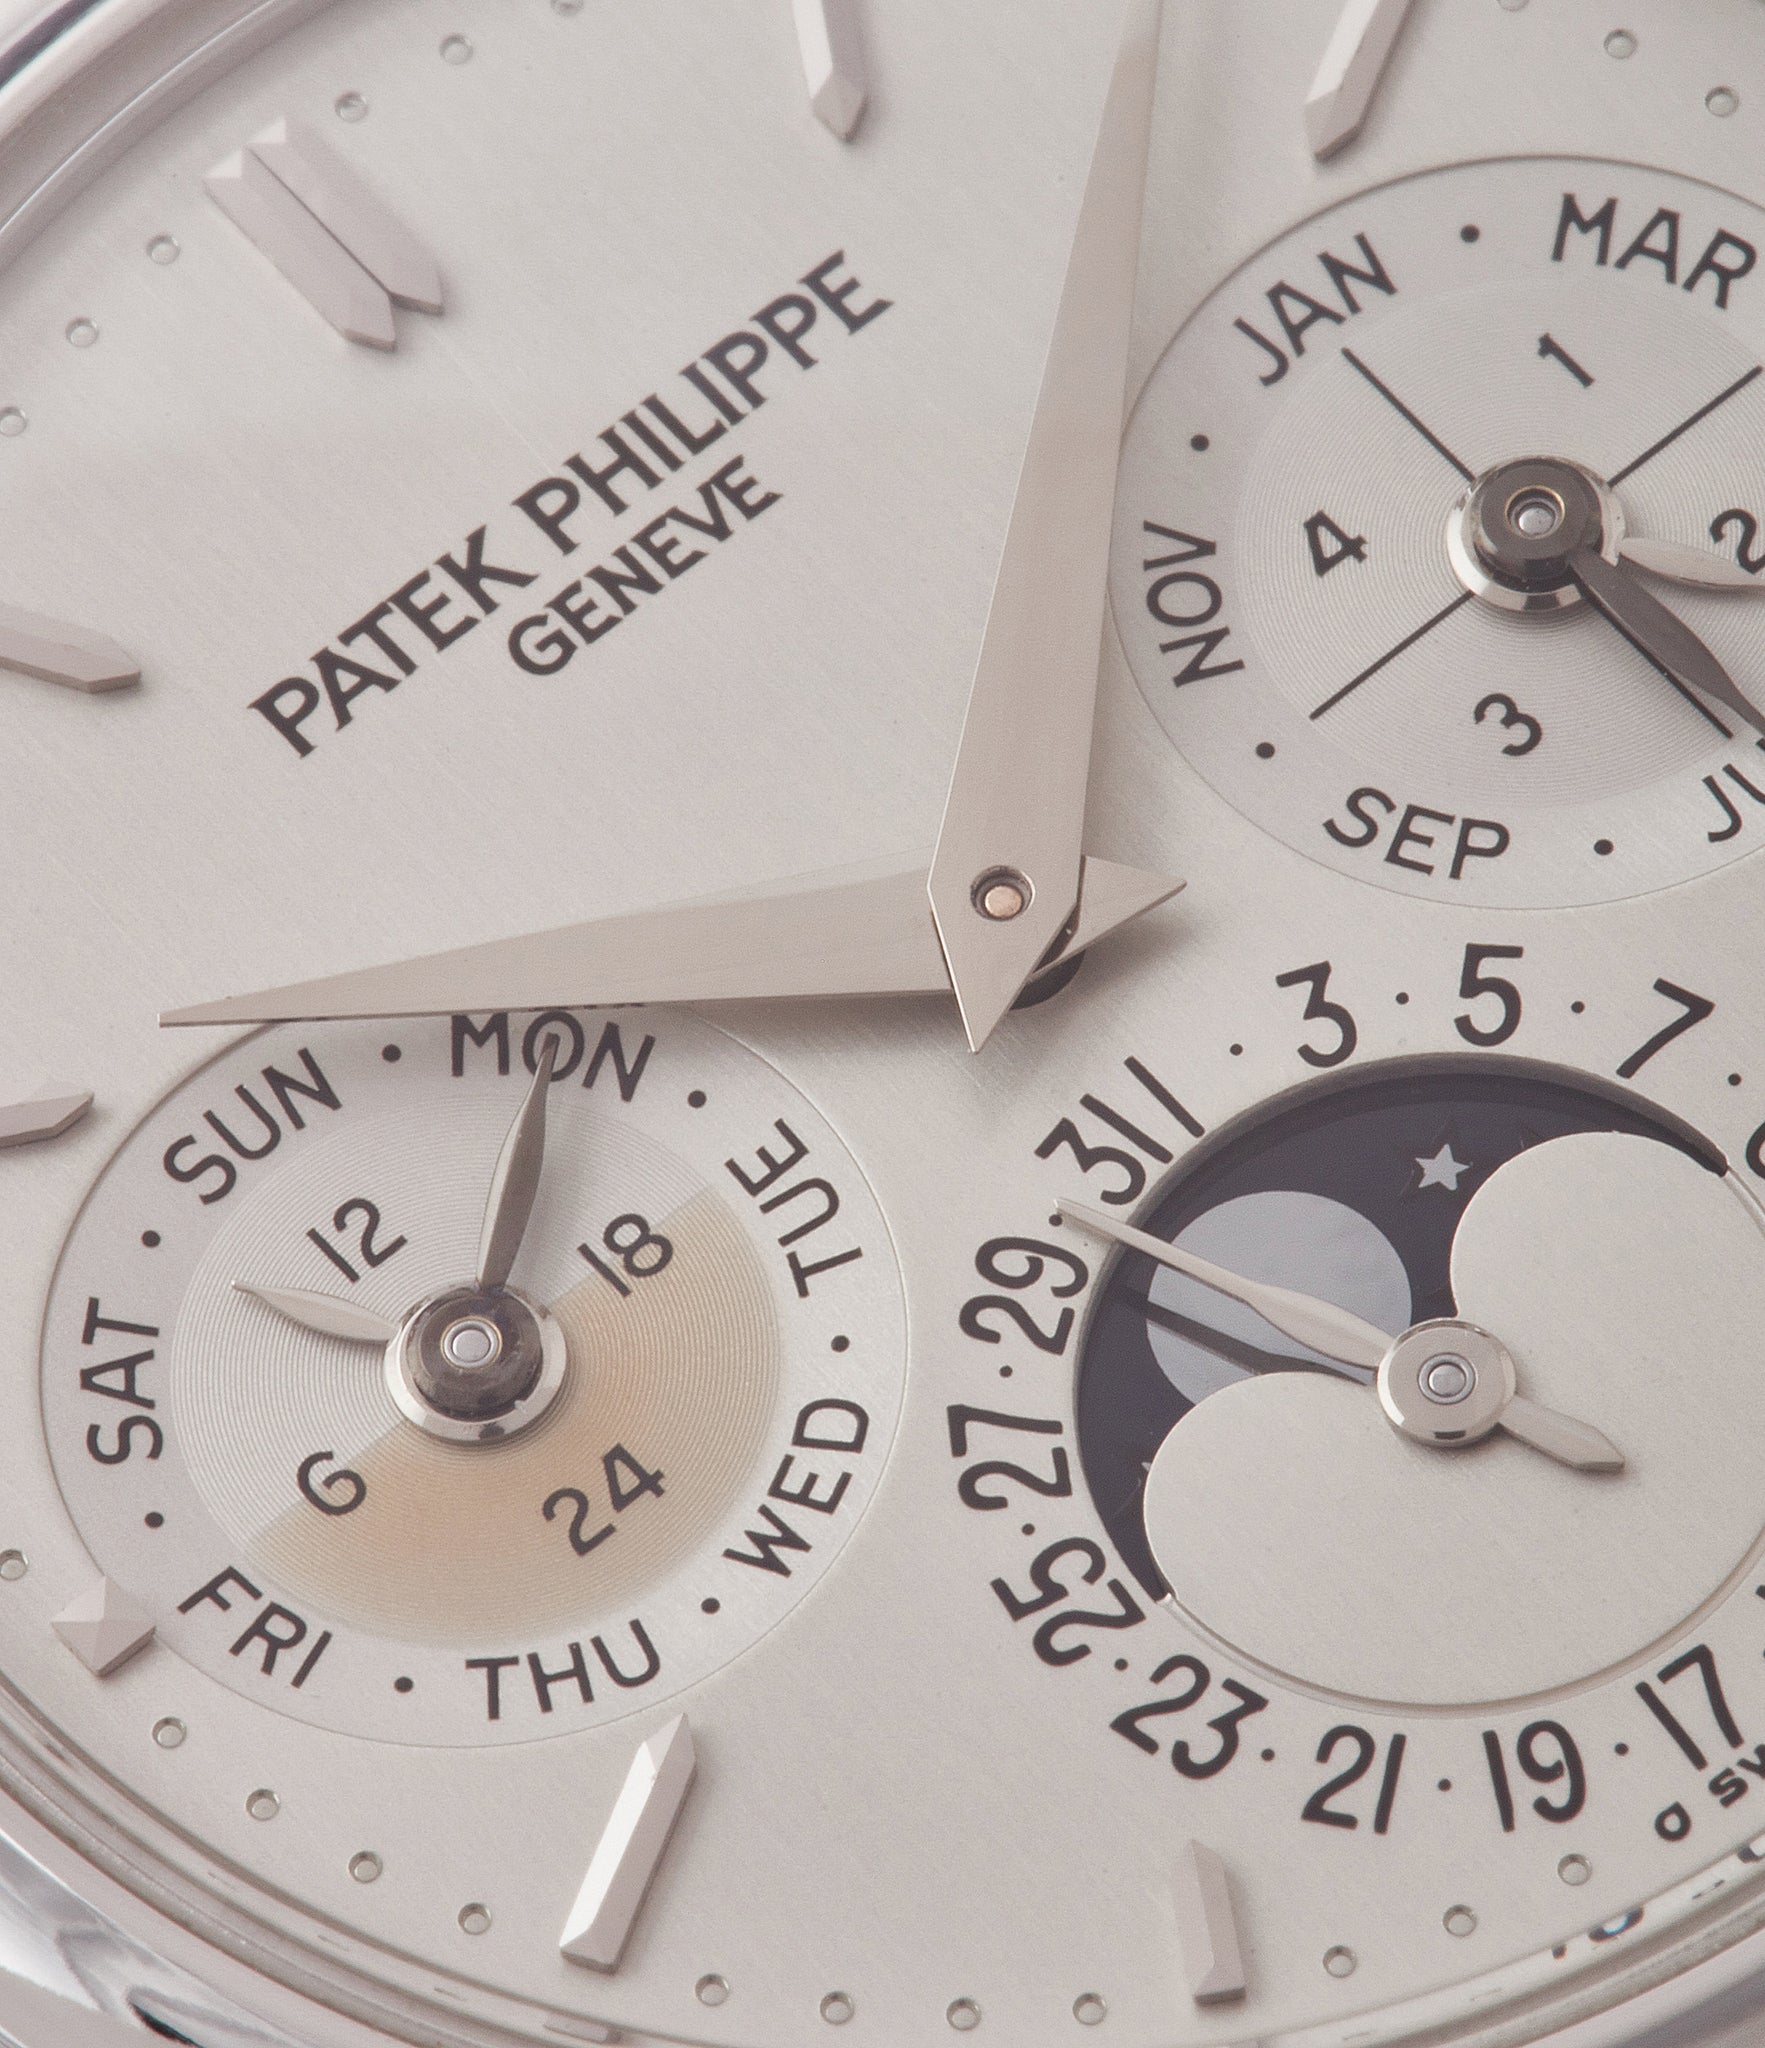 silver dial Patek Philippe 3940P platinum perpetual calendar rare dress watch full set for sale online at A Collected Man London UK specialist of rare watches